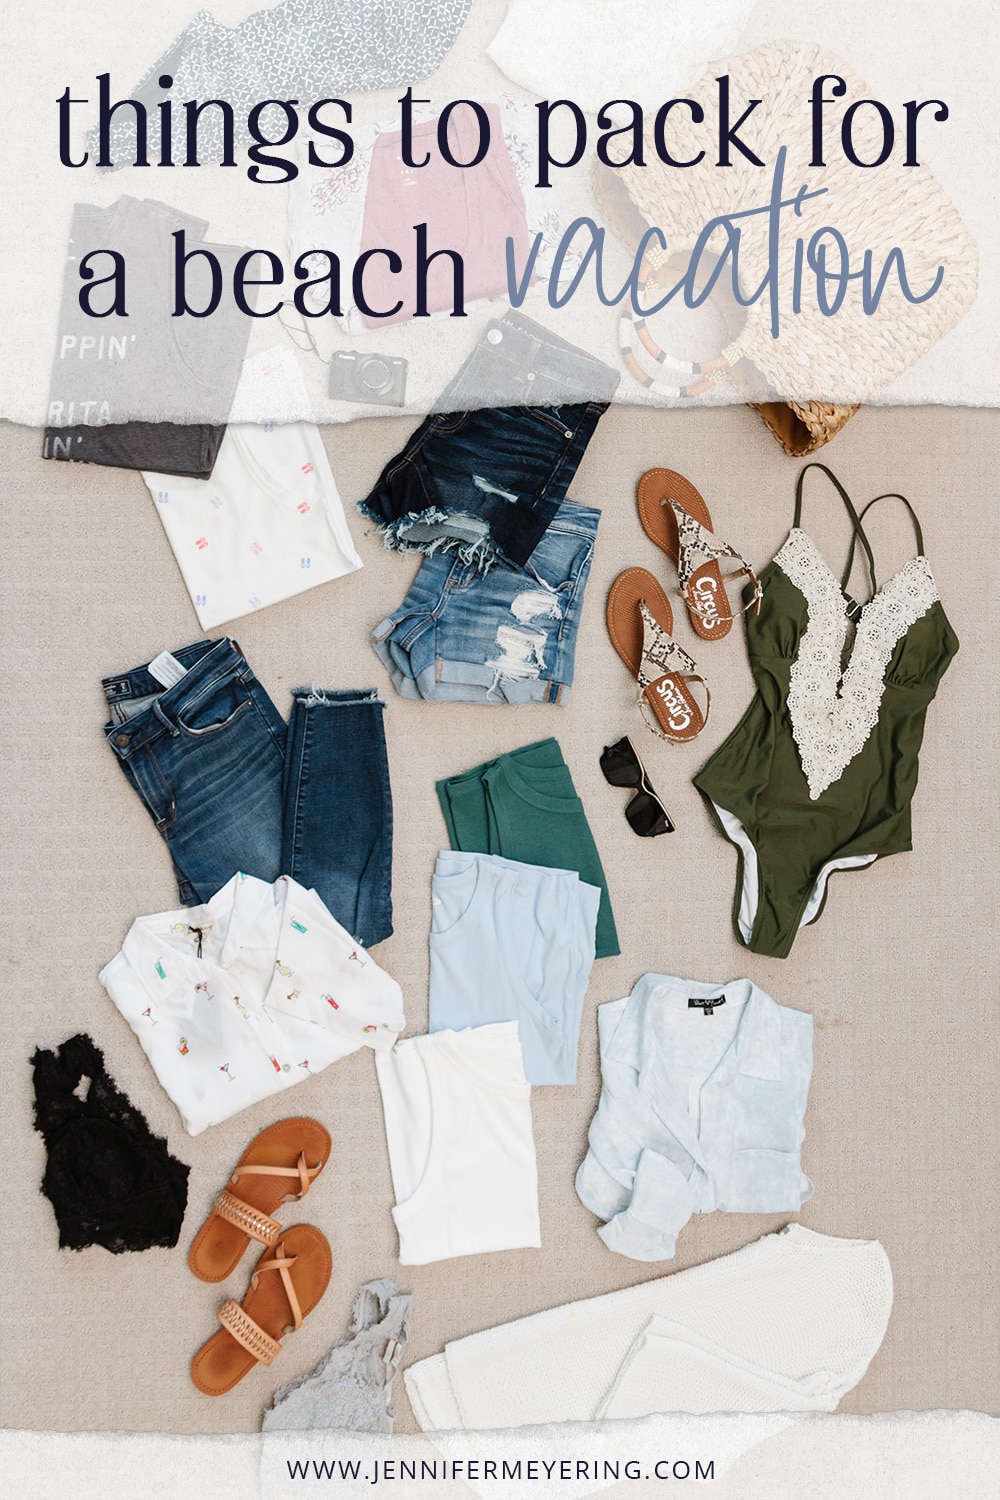 Things to Pack for a Beach Vacation - JenniferMeyering.com